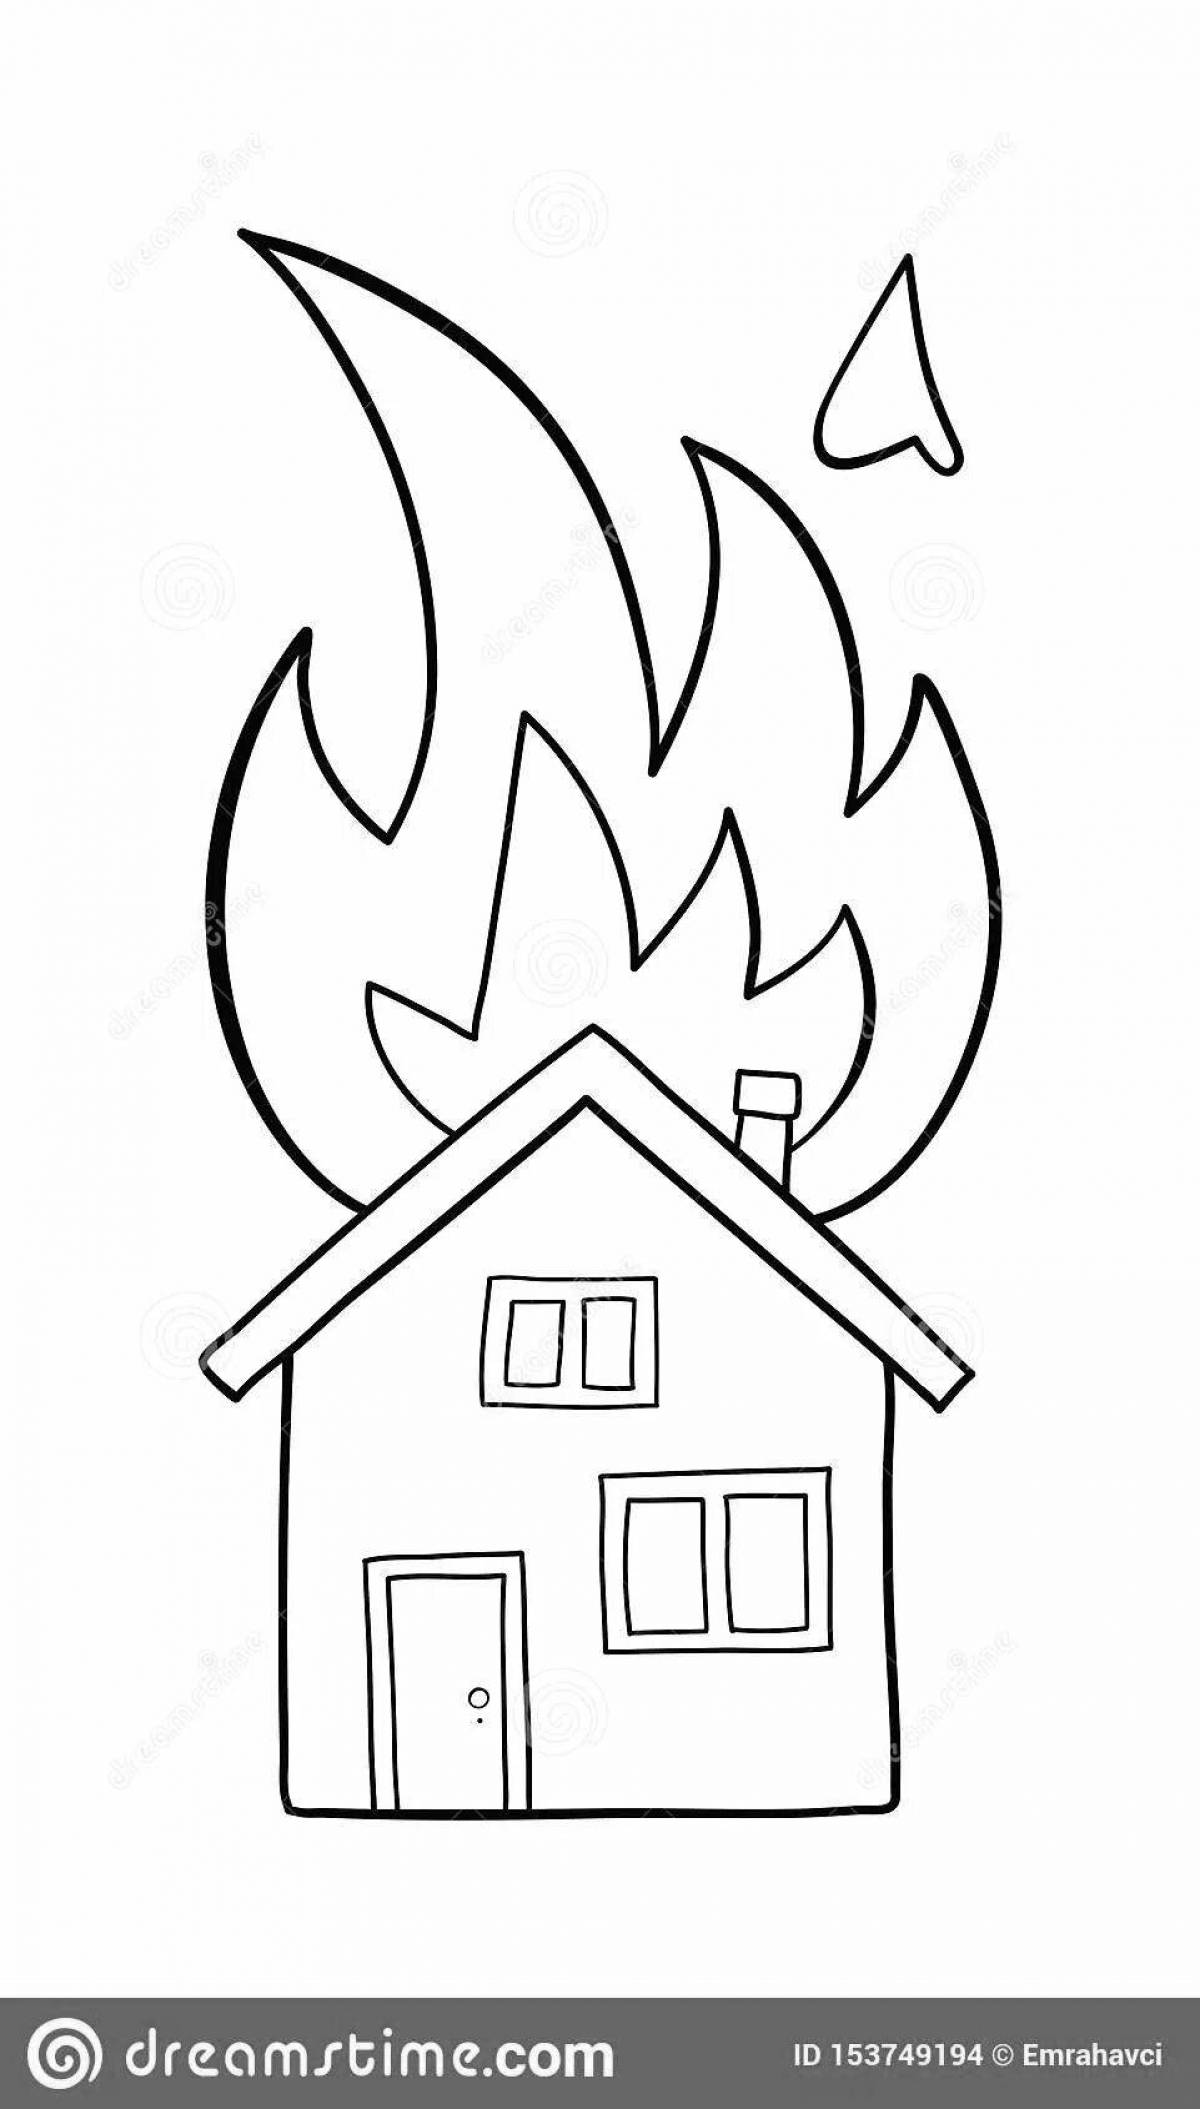 Gorgeous burning house coloring book for kids